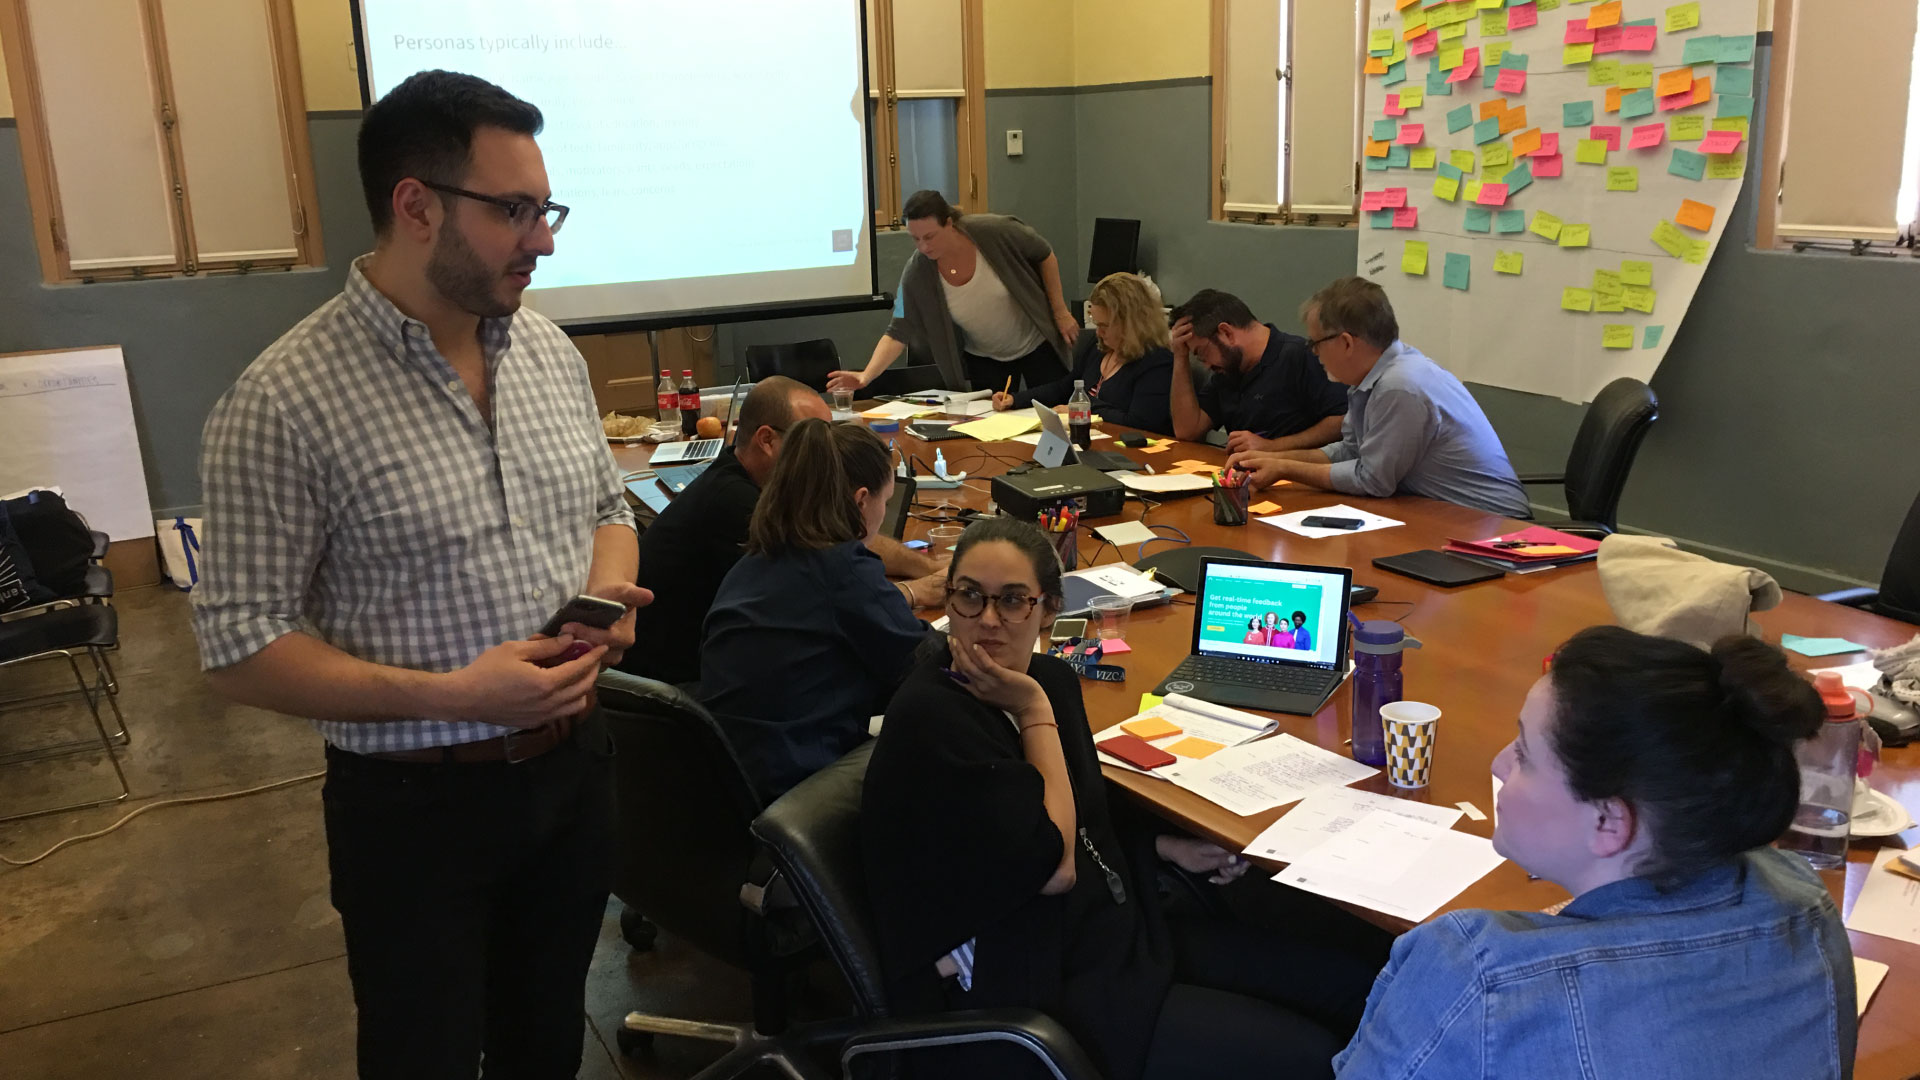 Michael Tedeschi facilitating a design thinking workshop with participants around a table with sticky notes in the background. 